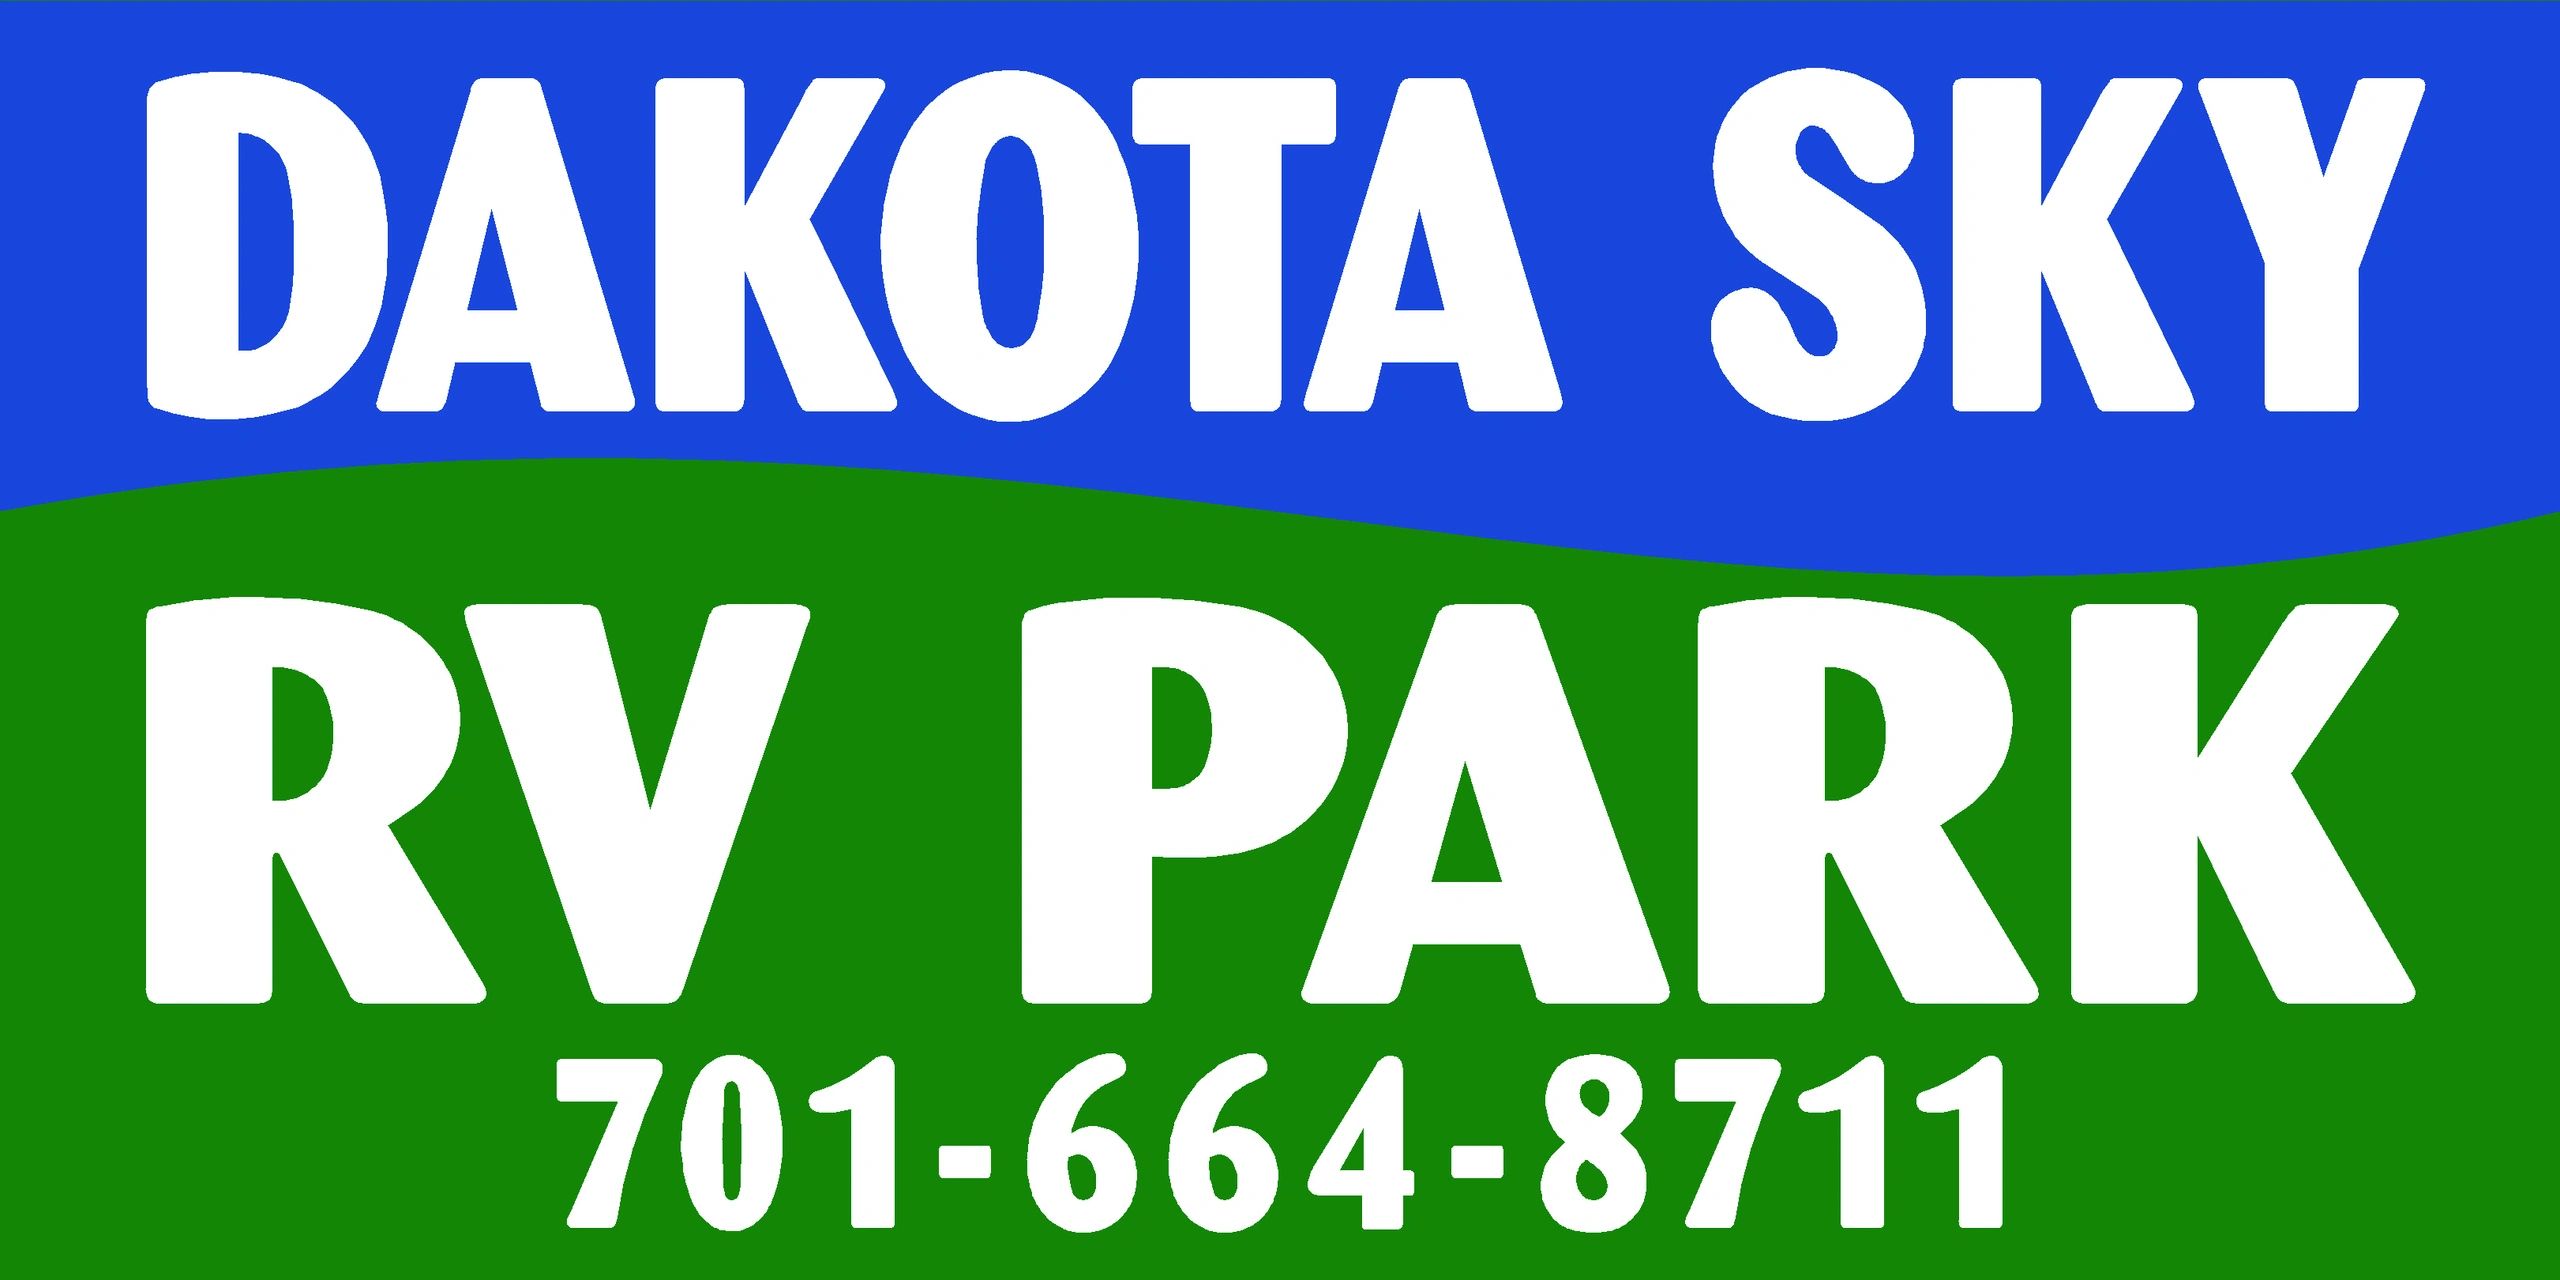 Dakota Sky RV park is a perfect choice for your home away from home as you work in Williams County.
